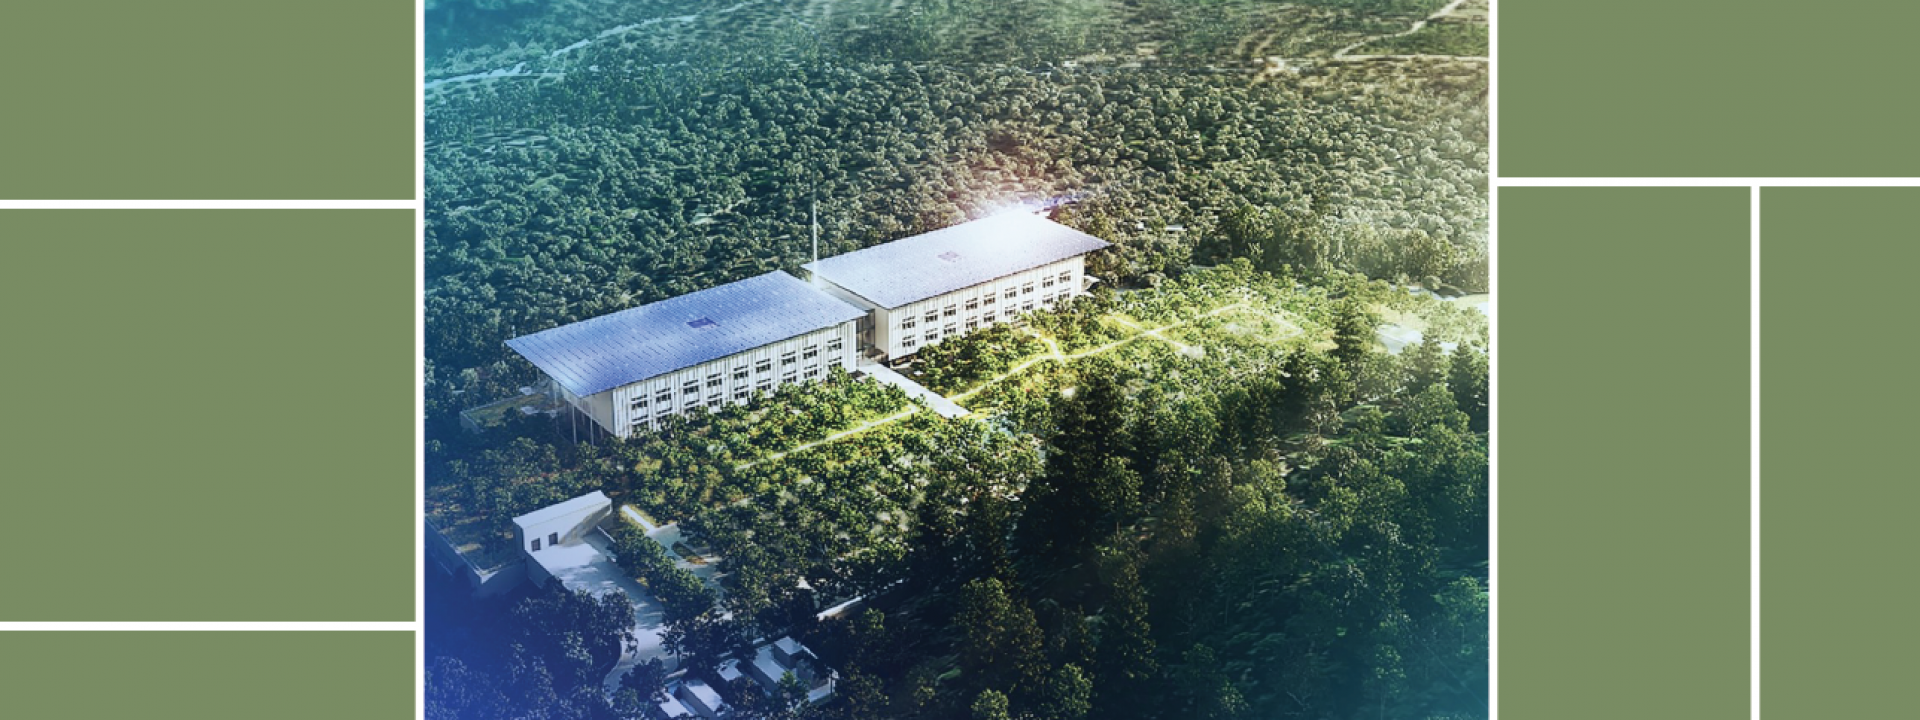 A Template of Future Hospitals by Renzo Piano Building Workshop (RPBW) - Εικόνα